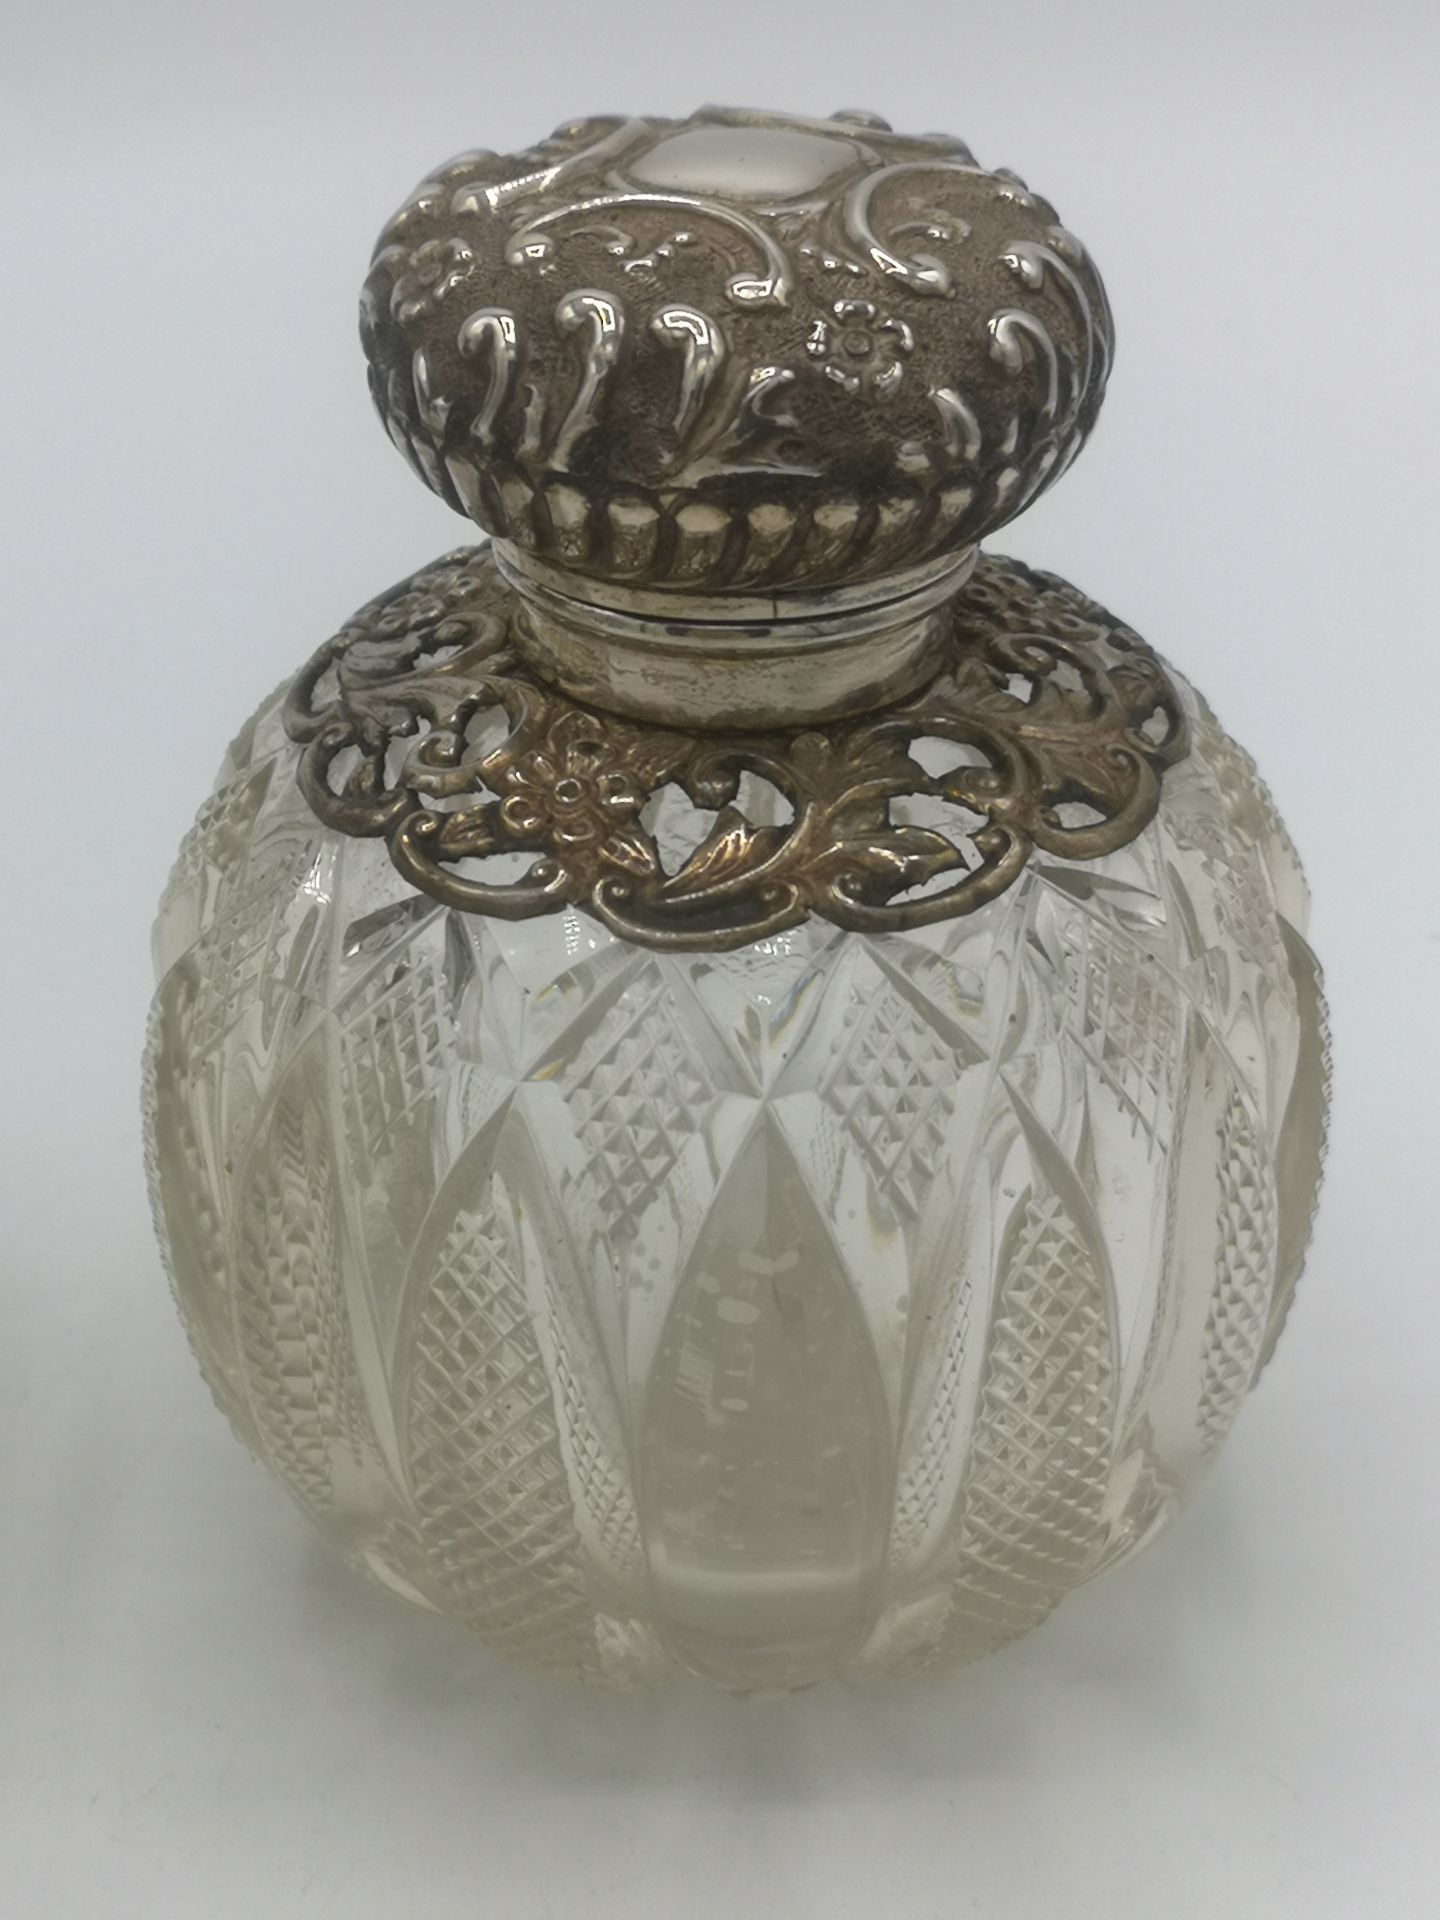 Two cut glass and silver perfume bottles - Image 4 of 5